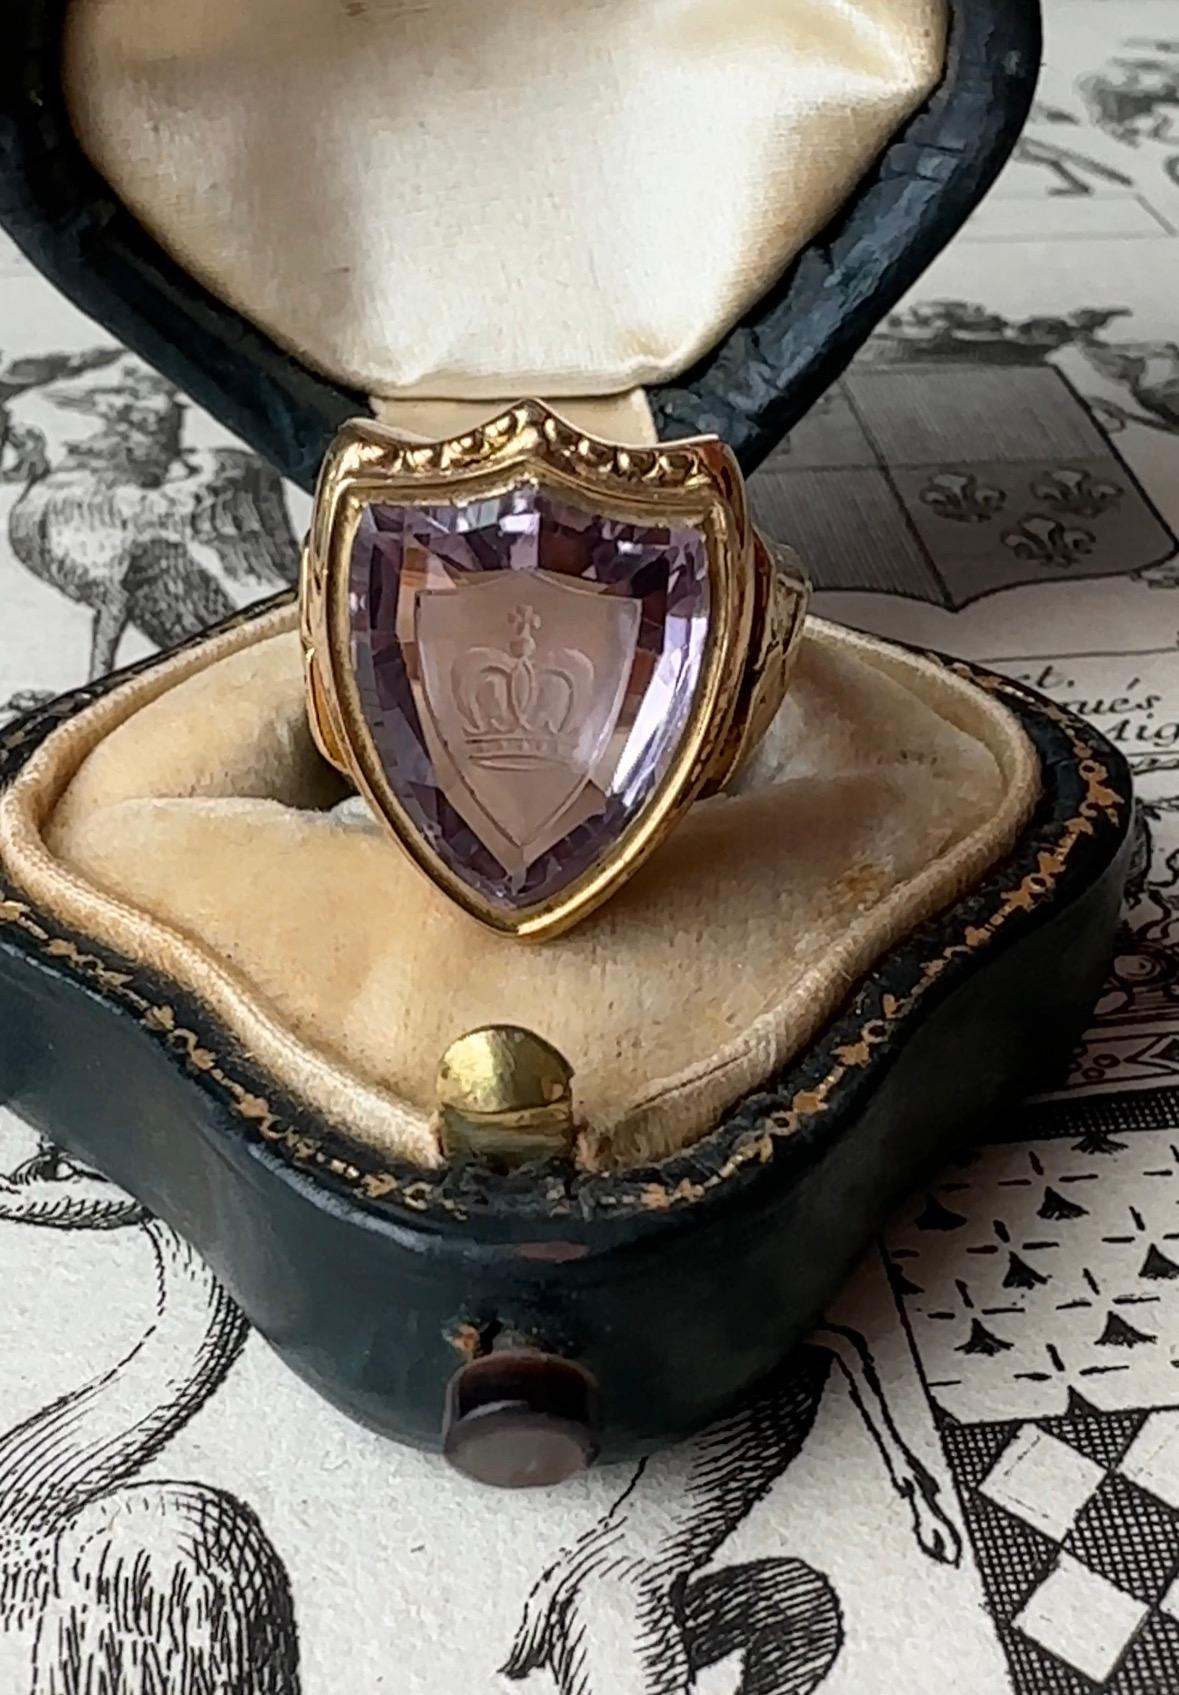 This glowing late Victorian ring is set with a luminous purple shield-cut amethyst that has been intaglio carved with a tiny crown. Substantially crafted in 12.2 grams of 18k gold, the shoulders are artfully adorned with hand-engraved fleur-de-lis